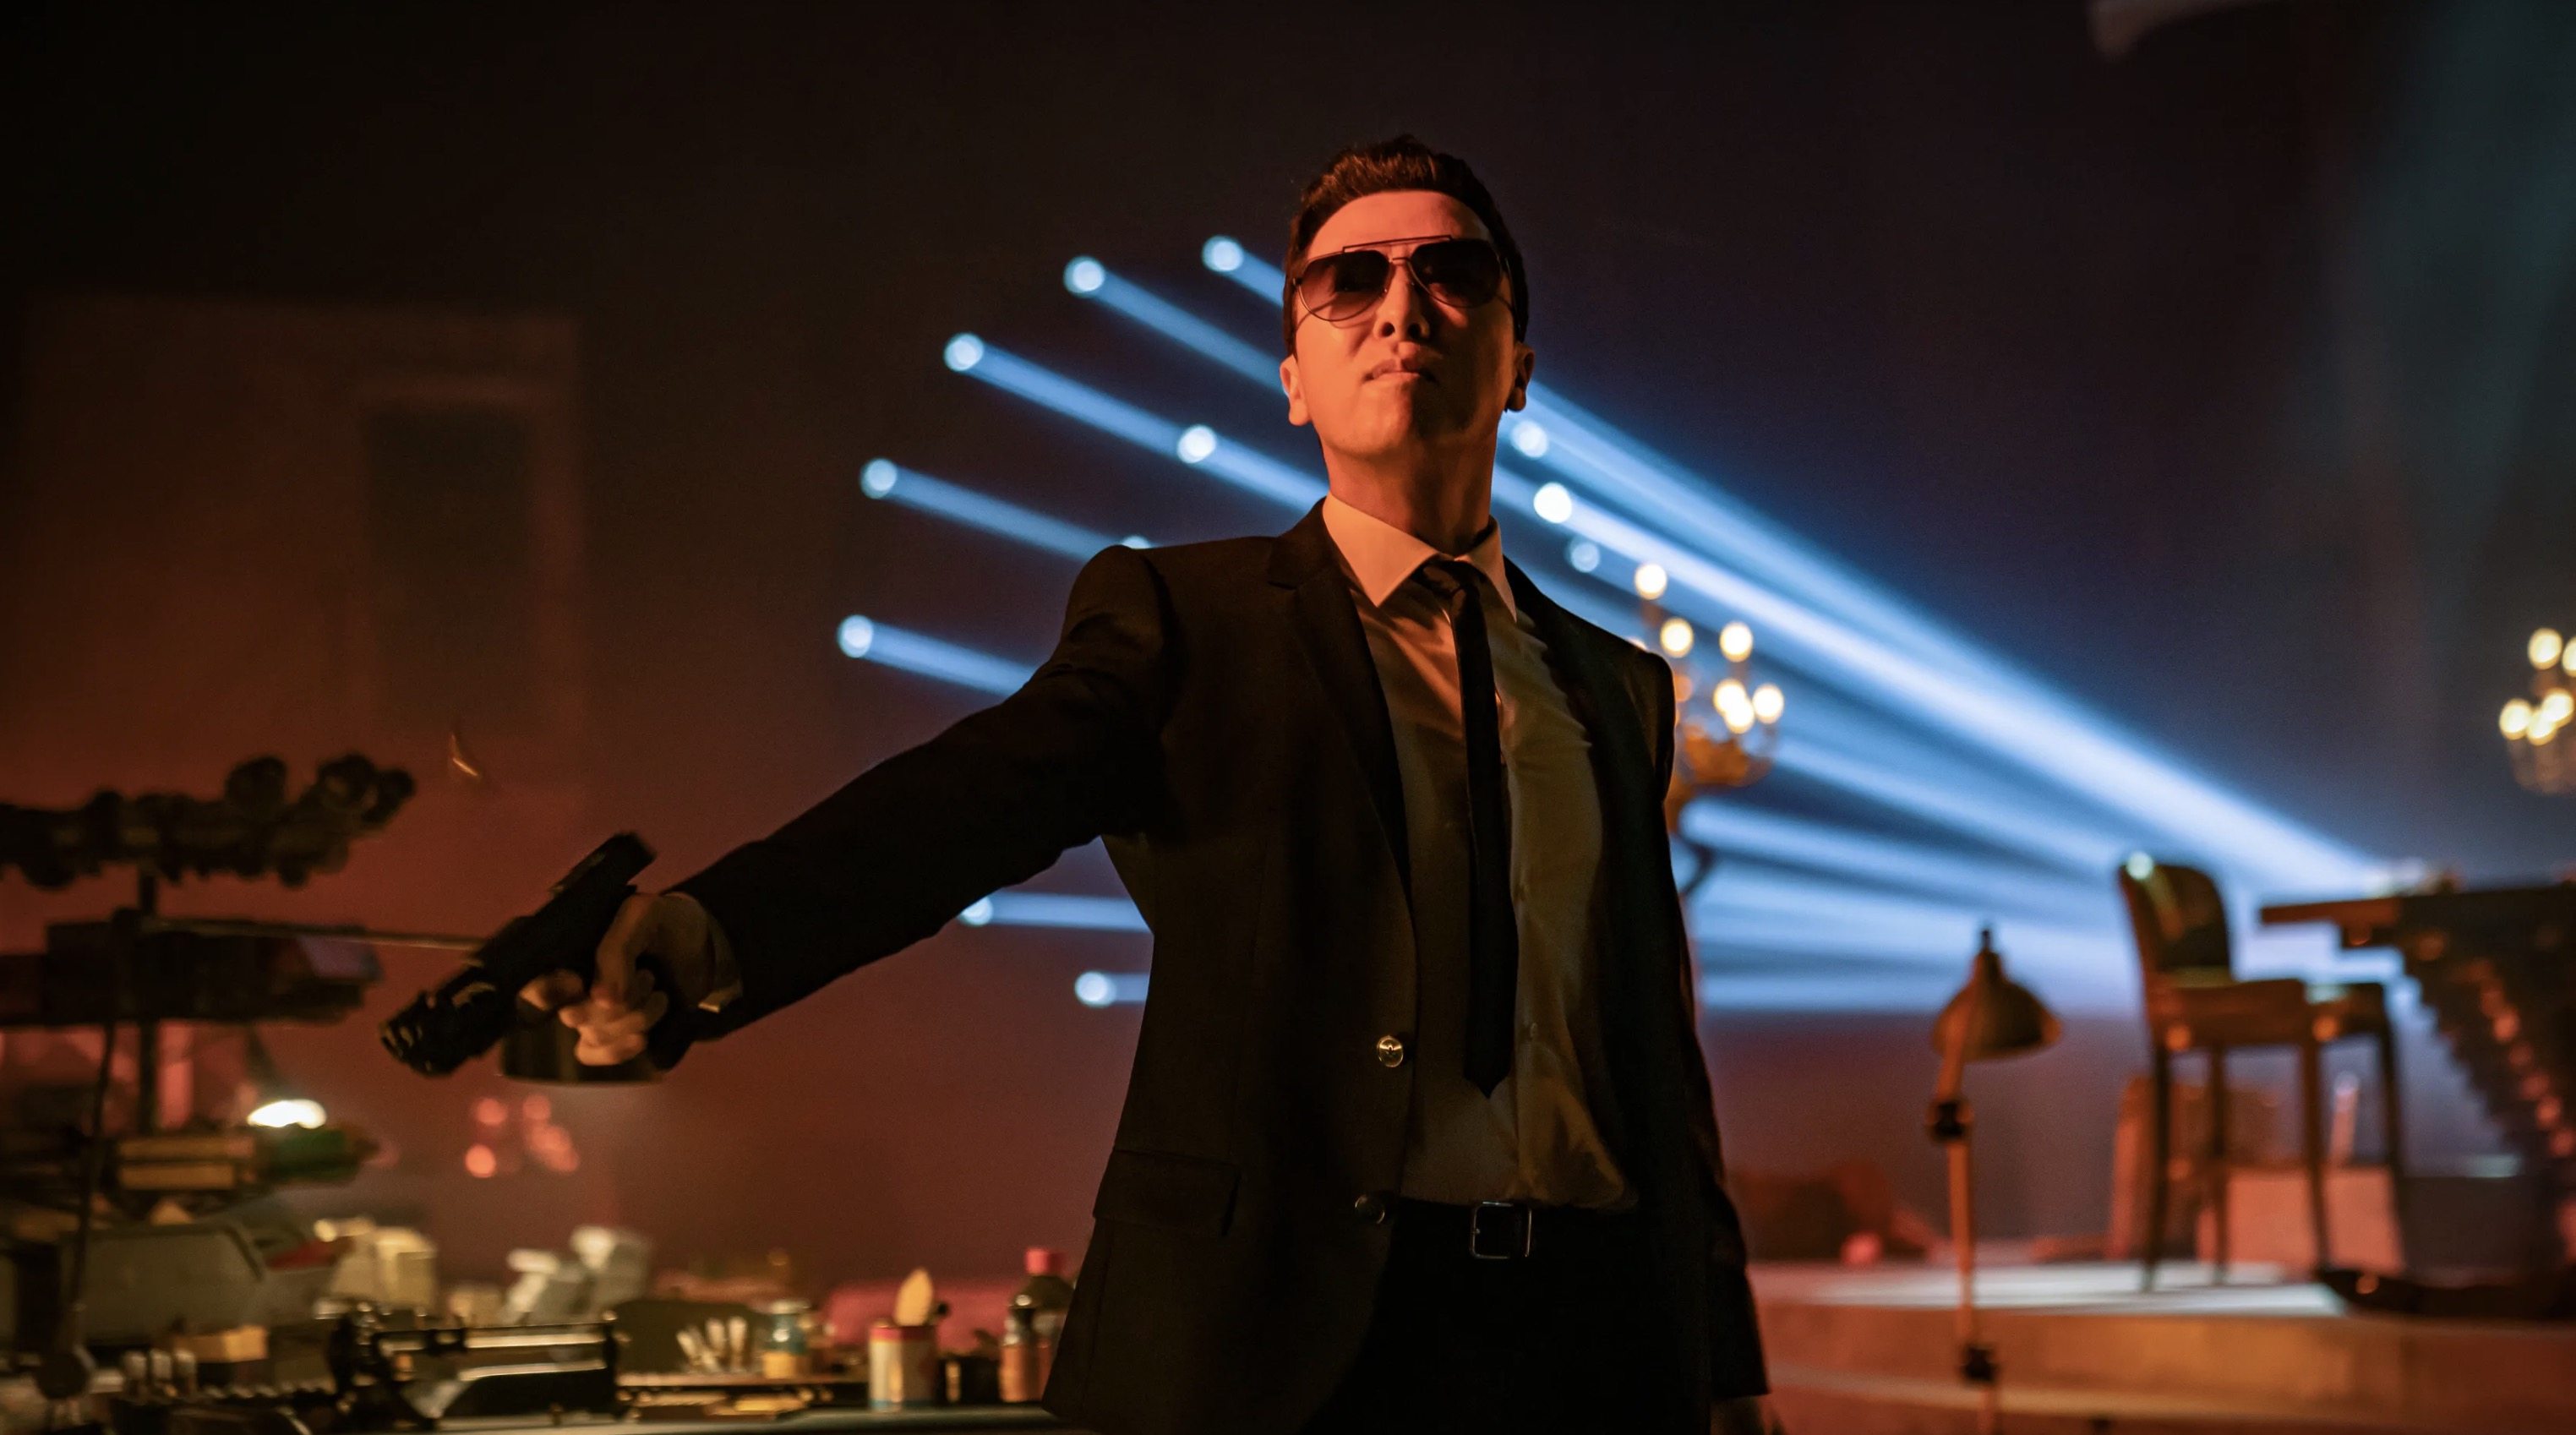 Hong Kong actor Donnie Yen plays the foul-mouthed, blind assassin “Caine” in John Wick: Chapter 4. Photo: Lionsgate